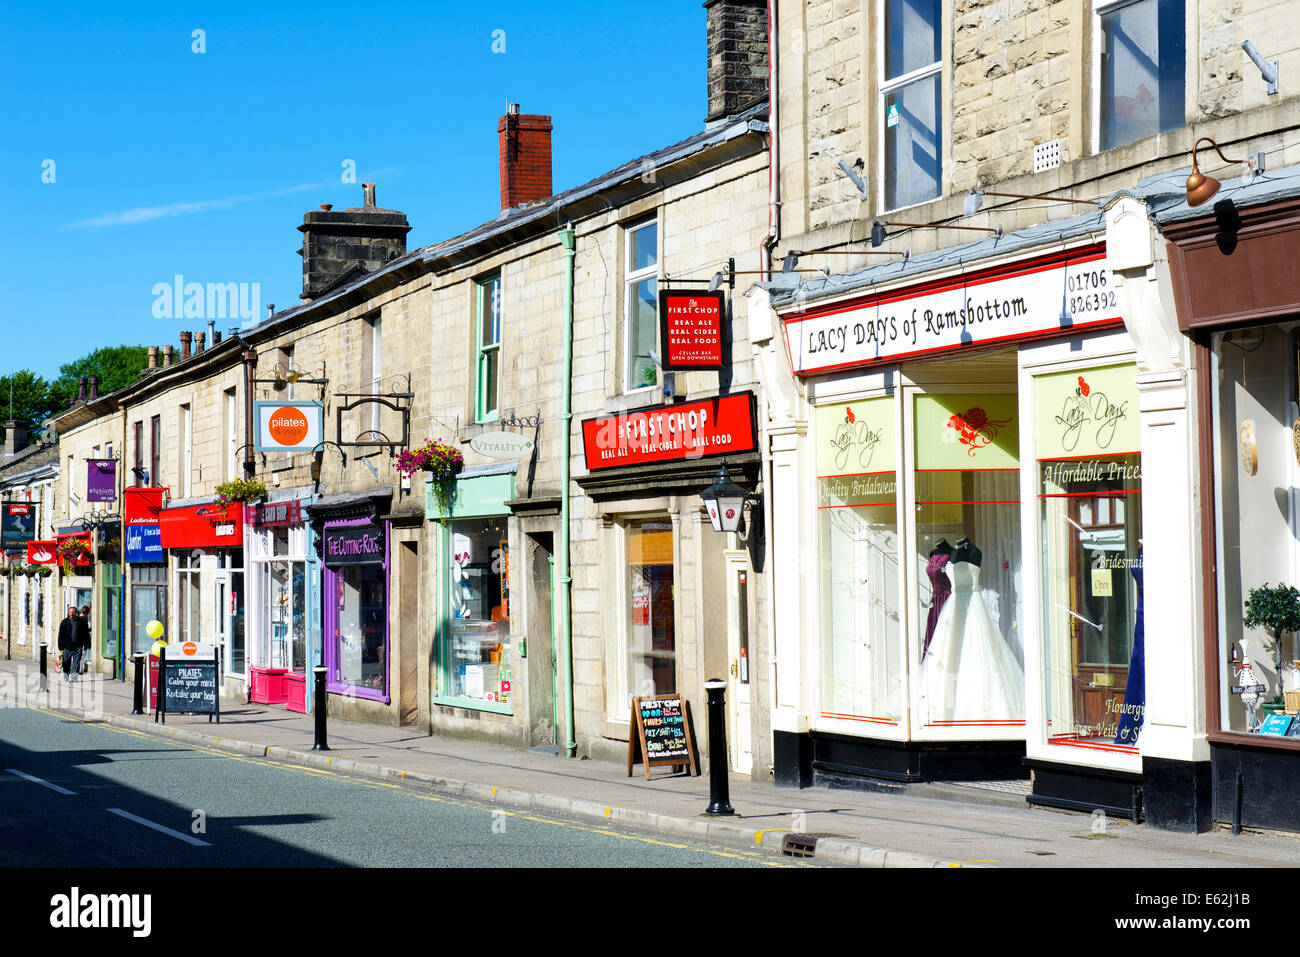 Dans la rue Ramsbottom, Greater Manchester, Angleterre, Royaume-Uni Banque D'Images